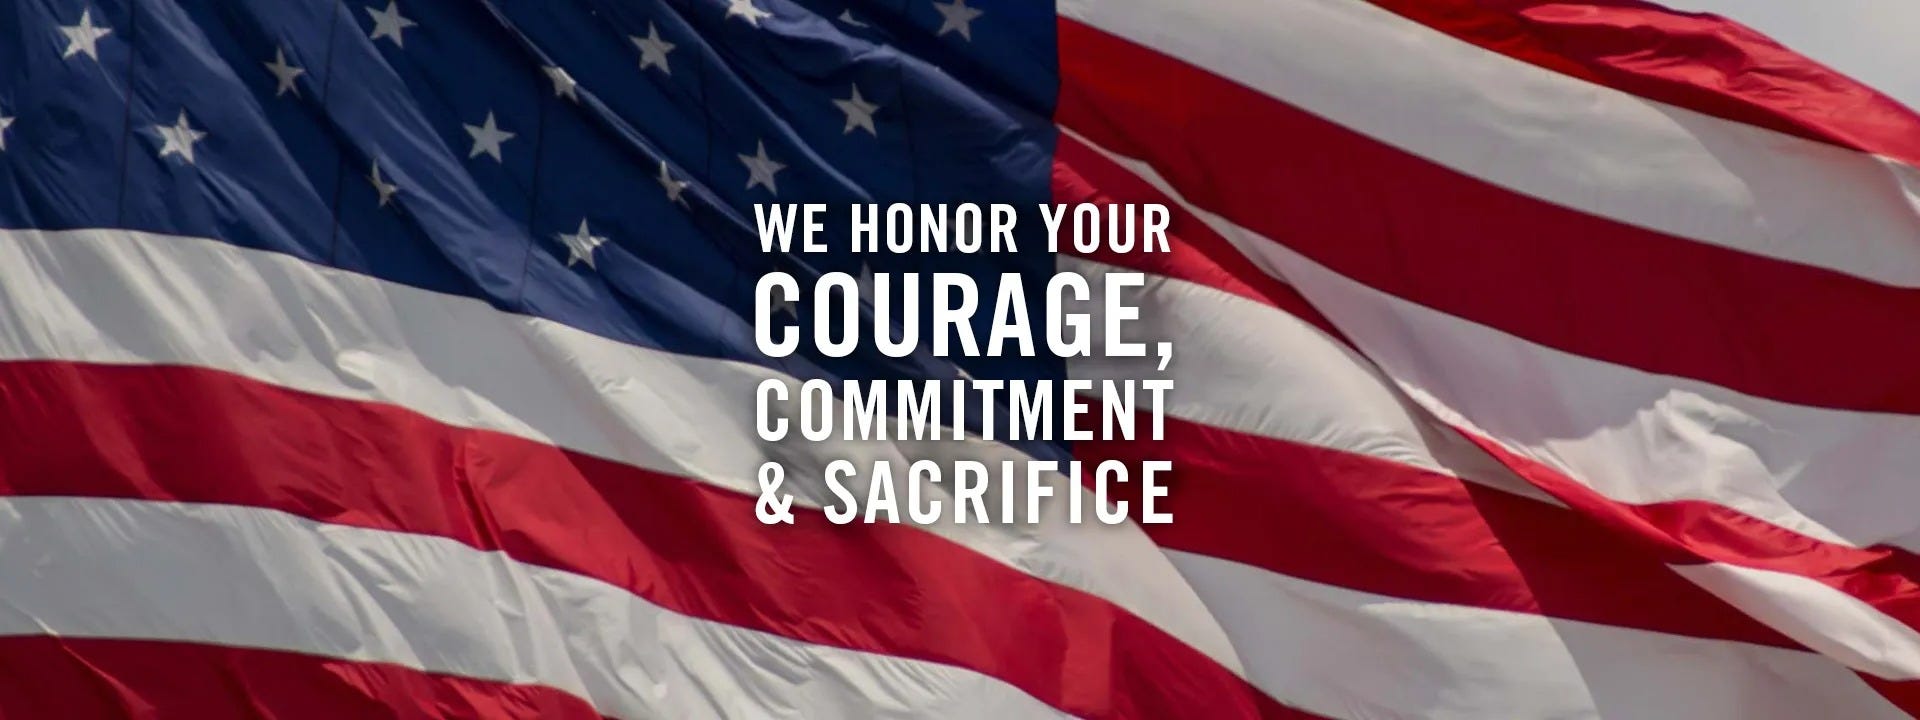 We Honor Your Courage, Commitment & Sacrifice